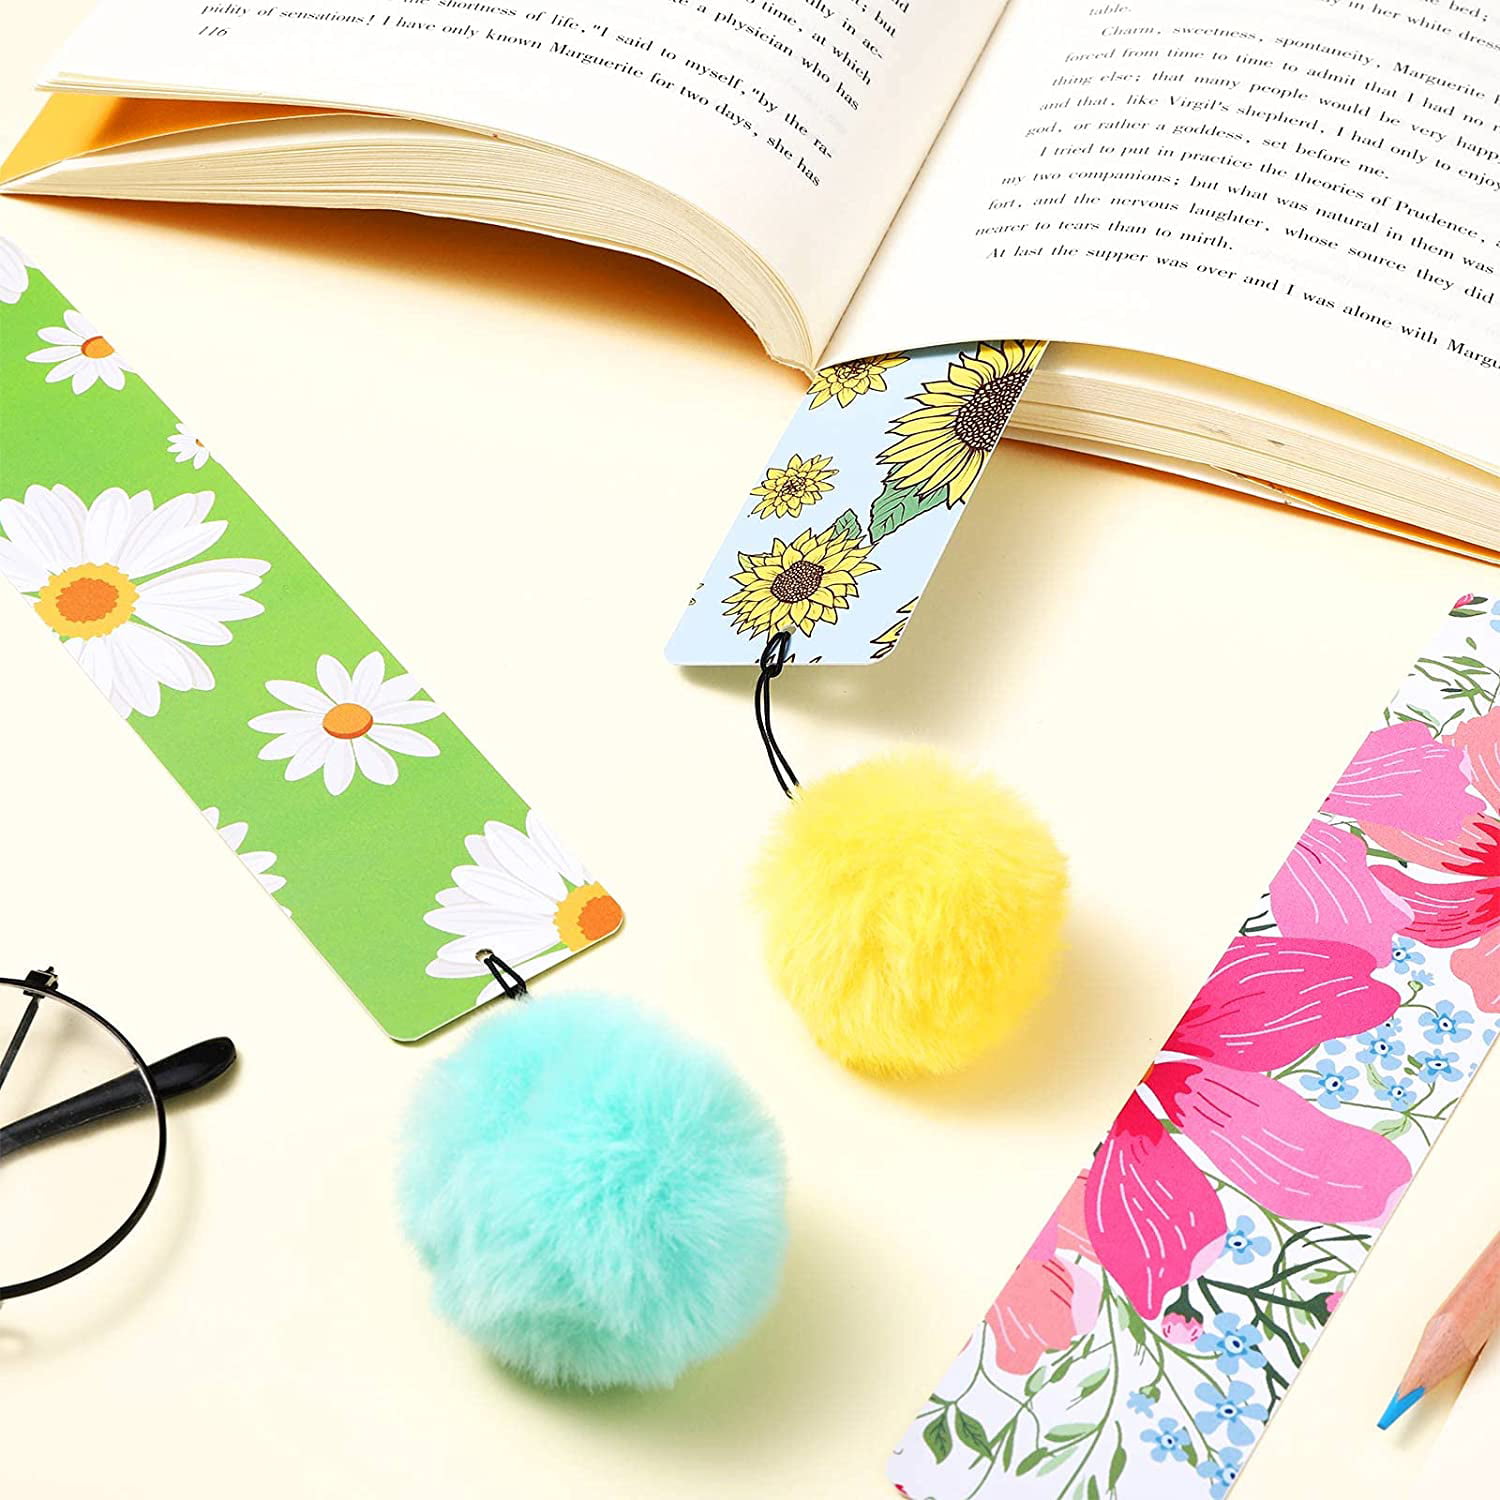 NEW 24 LAVENDER SCENTED BOOKMARKS PARTY FAVOR SCHOOL CLASSROOM REWARDS 